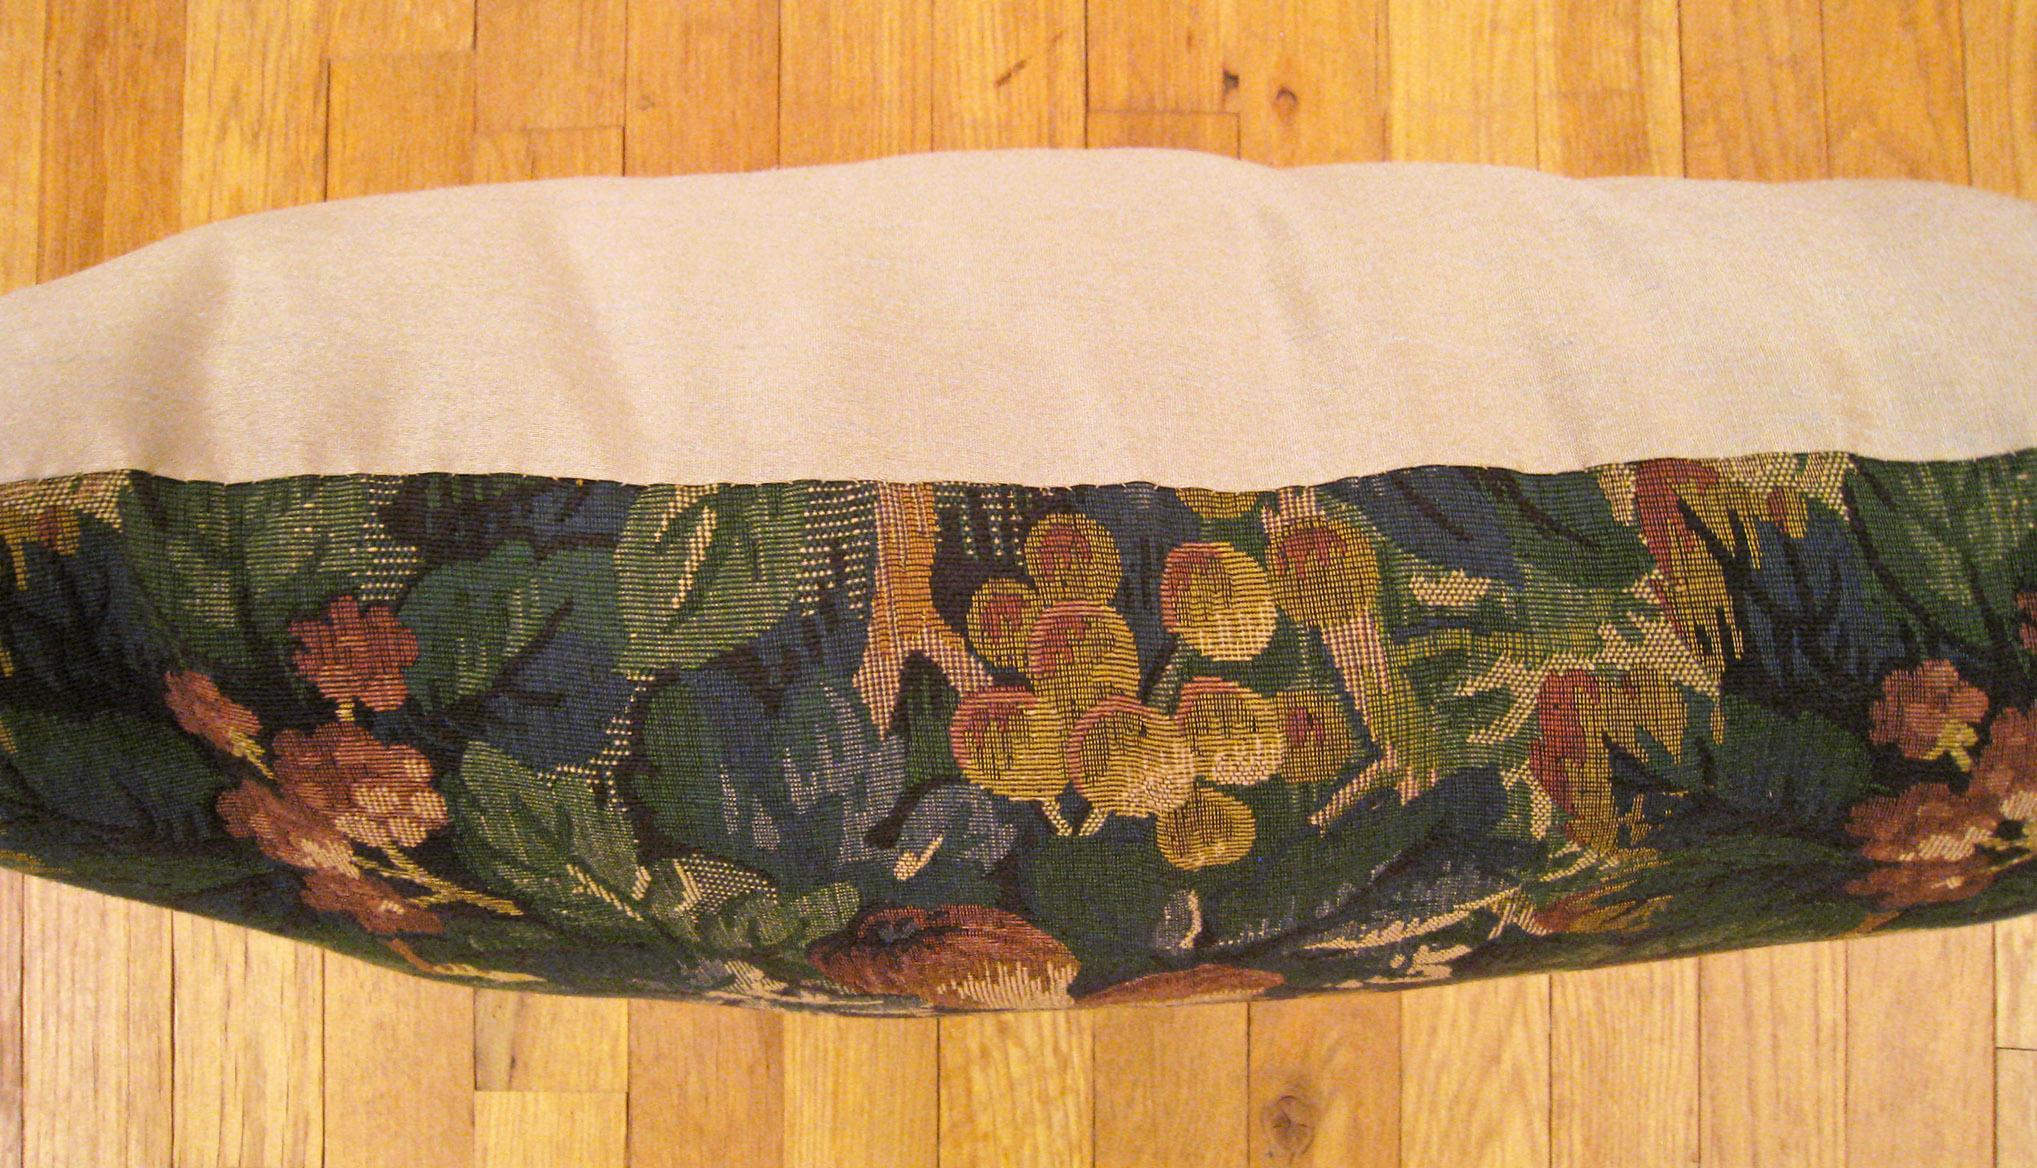 Decorative Antique Jacquard Tapestry Pillow with a Garden Design Allover In Good Condition For Sale In New York, NY